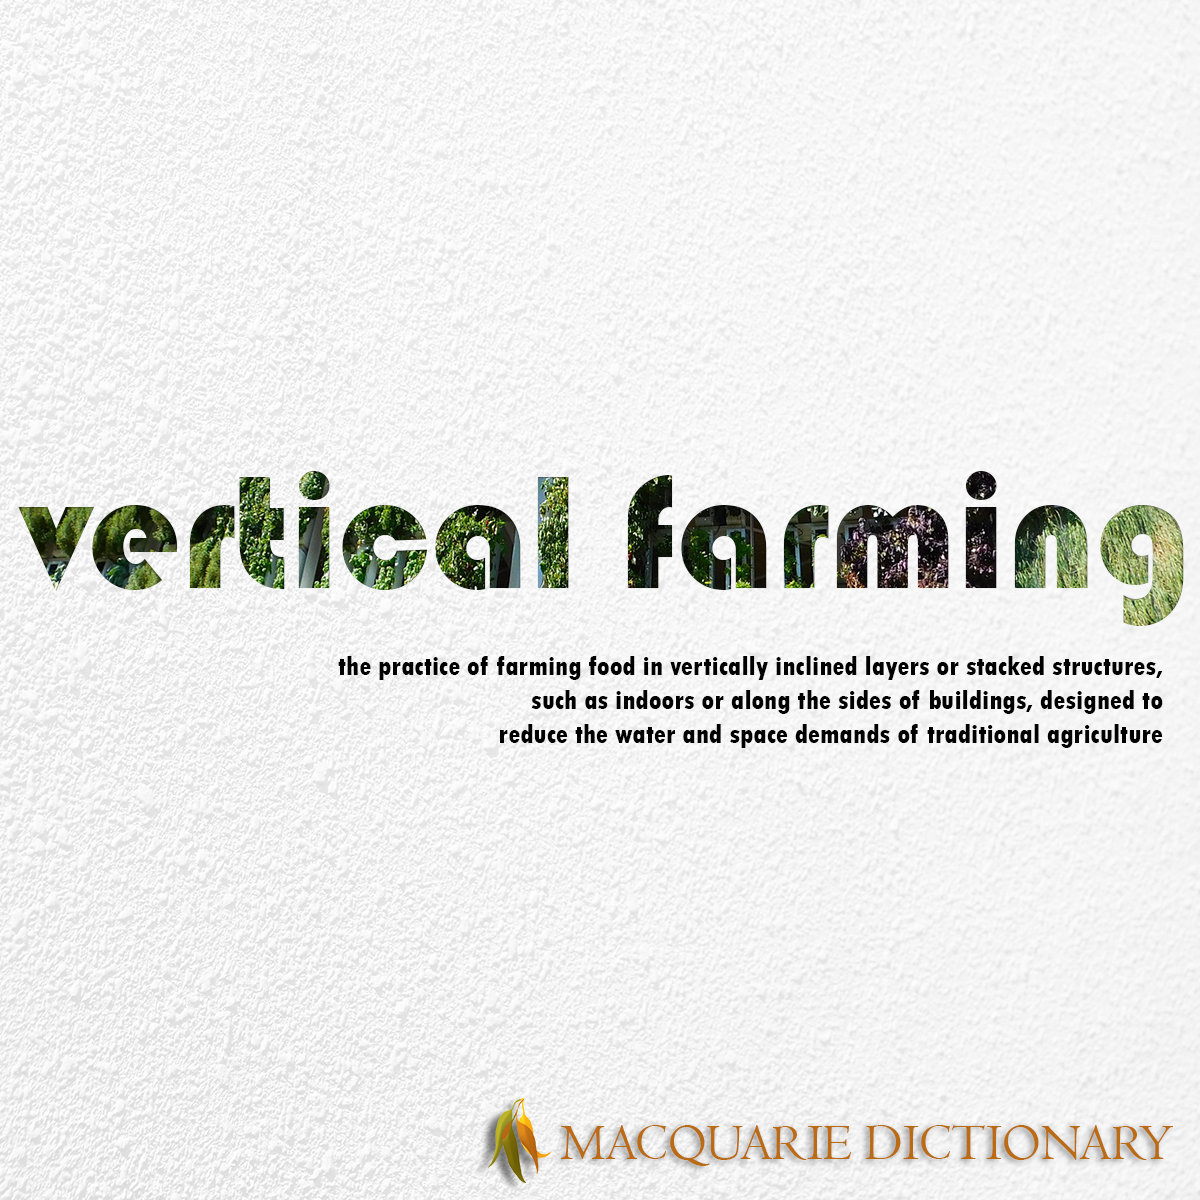 Image of Macquarie Dictionary Word of the Year - vertical farming - the practice of farming food in vertically inclined layers or stacked structures, such as indoors or along the sides of buildings, designed to reduce the water and space demands of traditional agriculture.